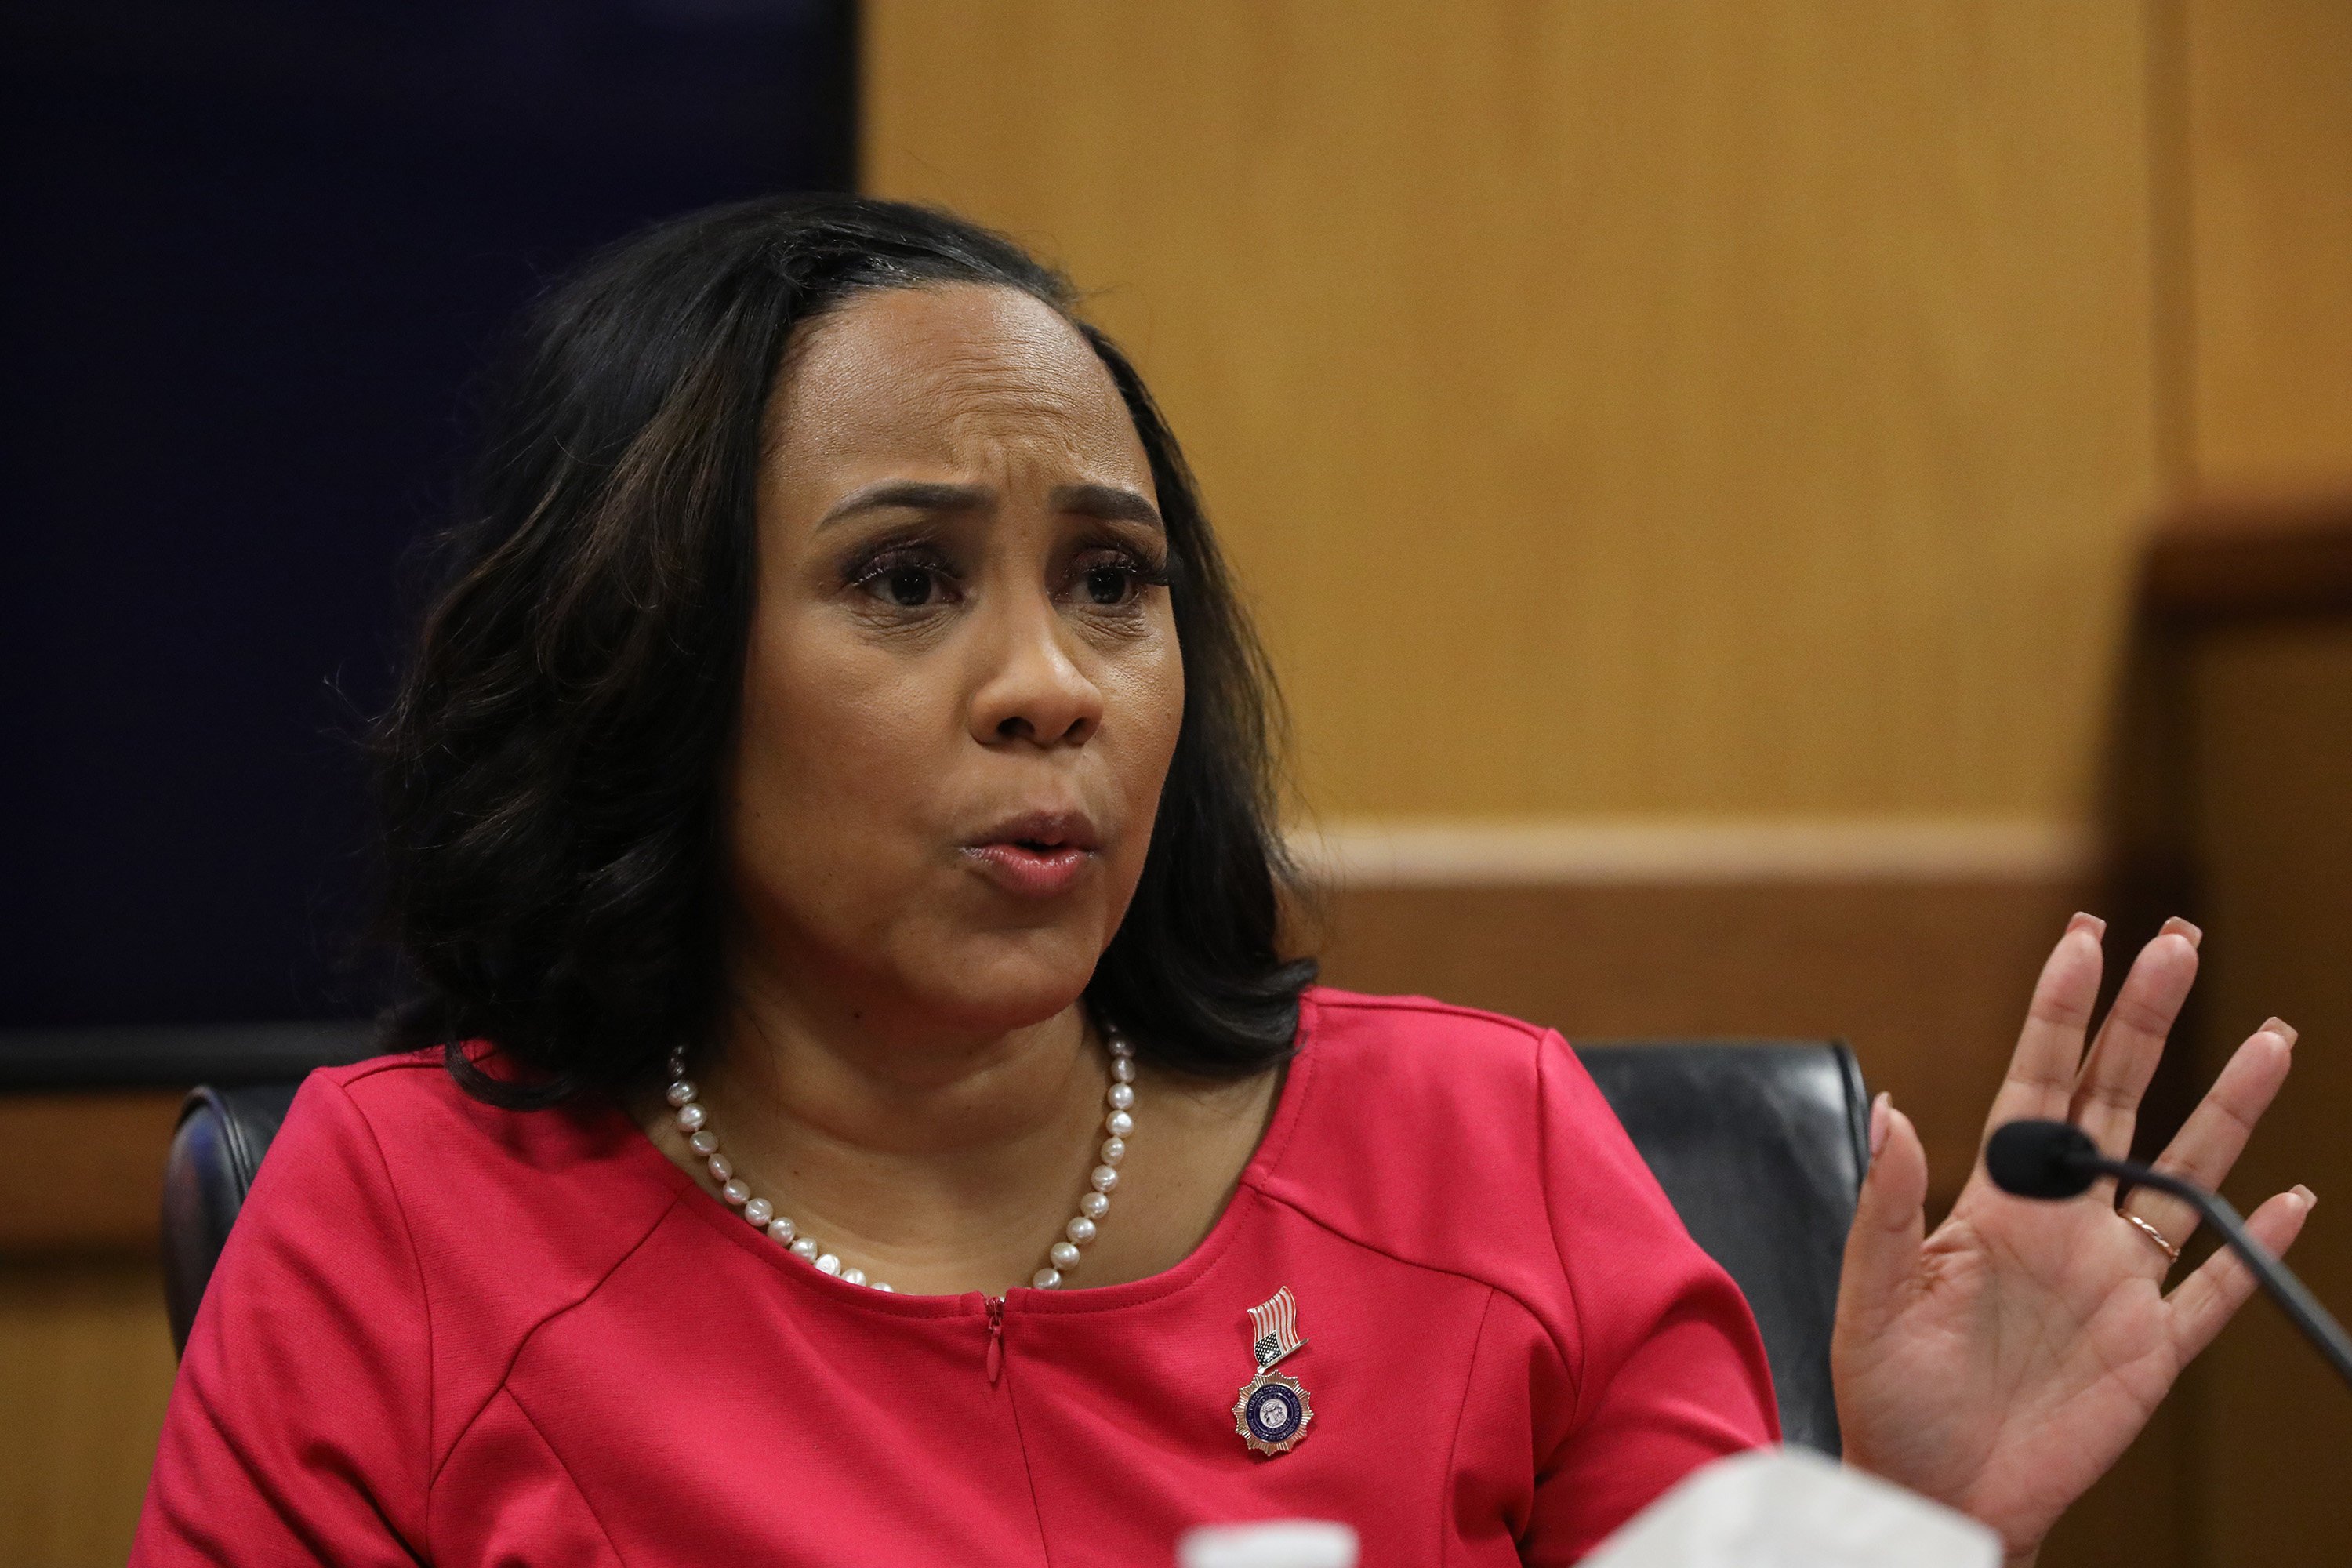 Fulton County District Attorney Fani Willis testifies during a hearing in Atlanta on Thursday. Photo: TNS